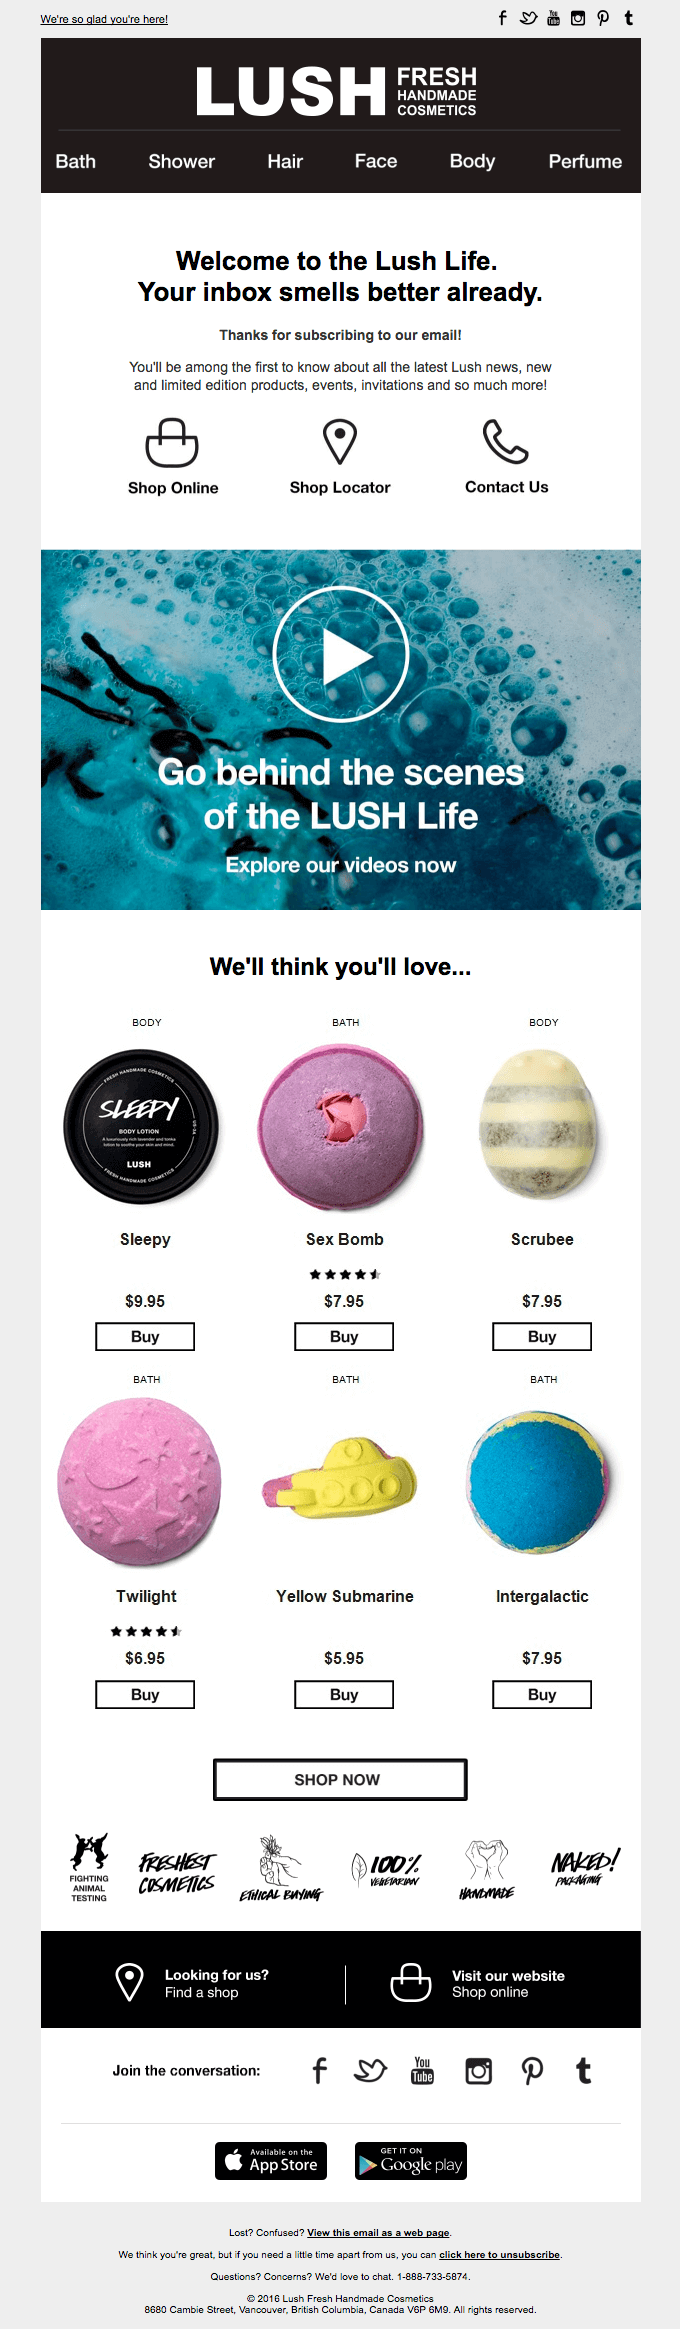 Lush-Welcome-Email